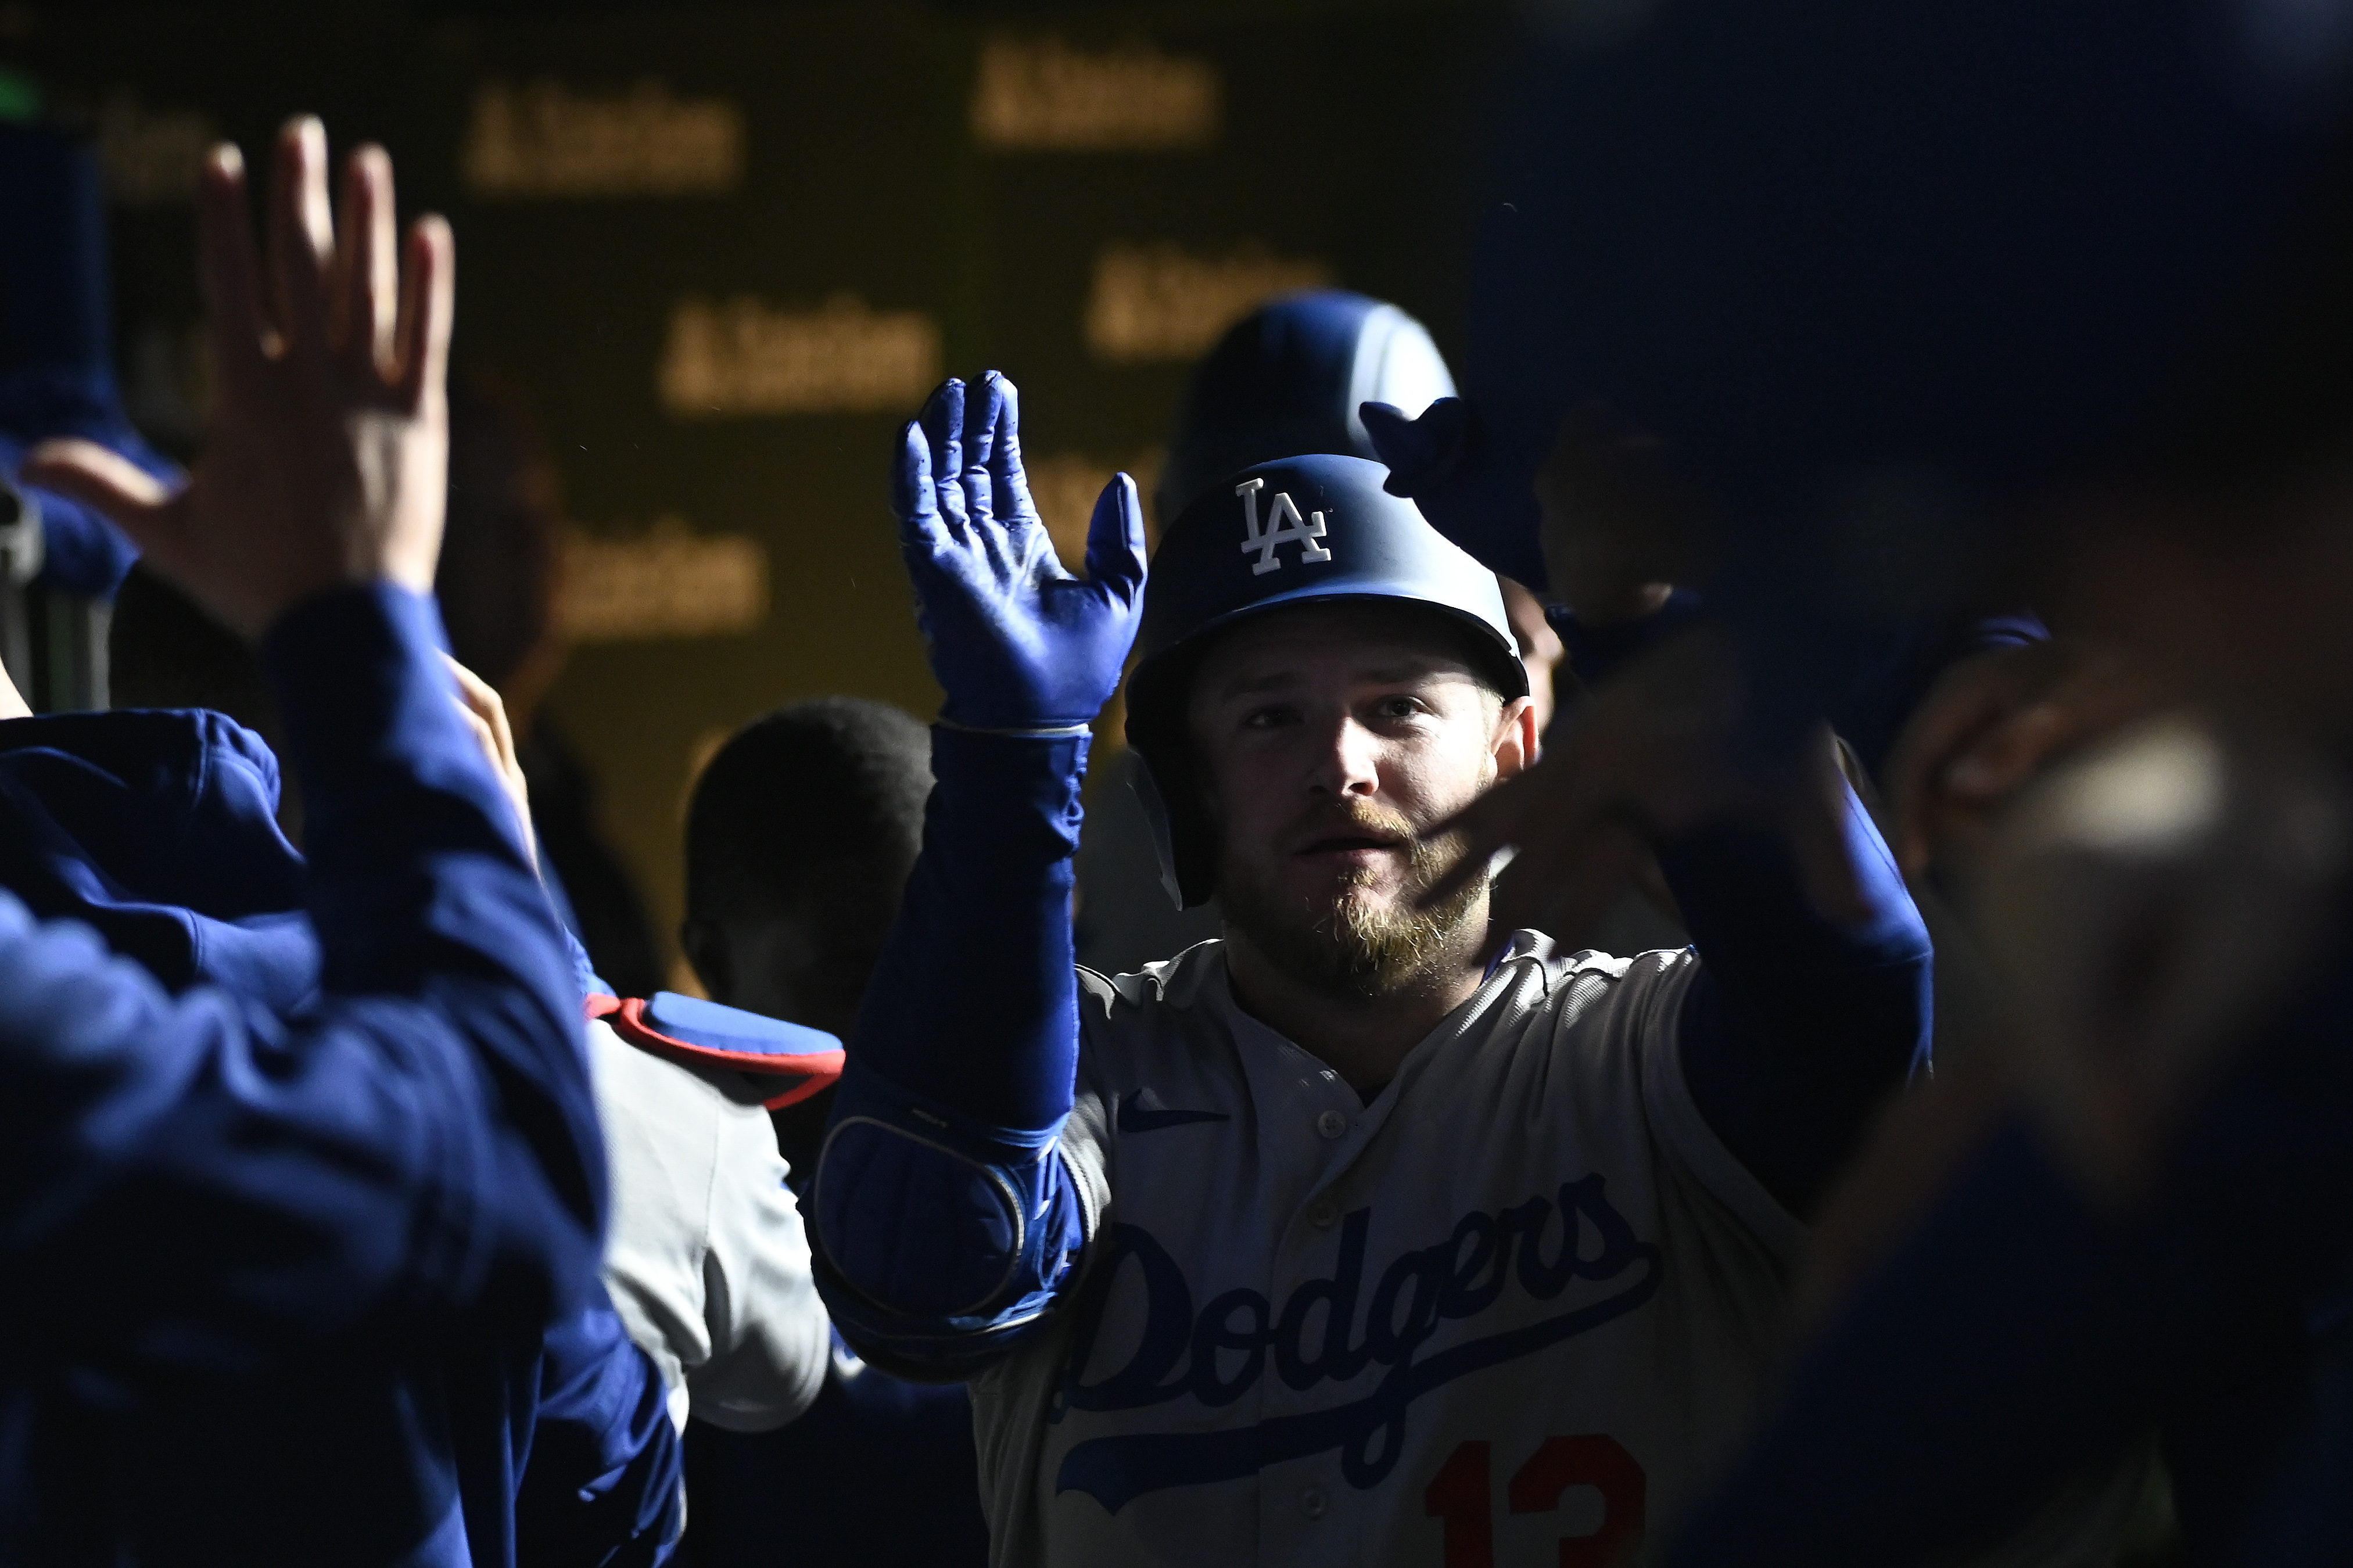 James Outman's 9th-inning grand slam propels Dodgers past Cubs